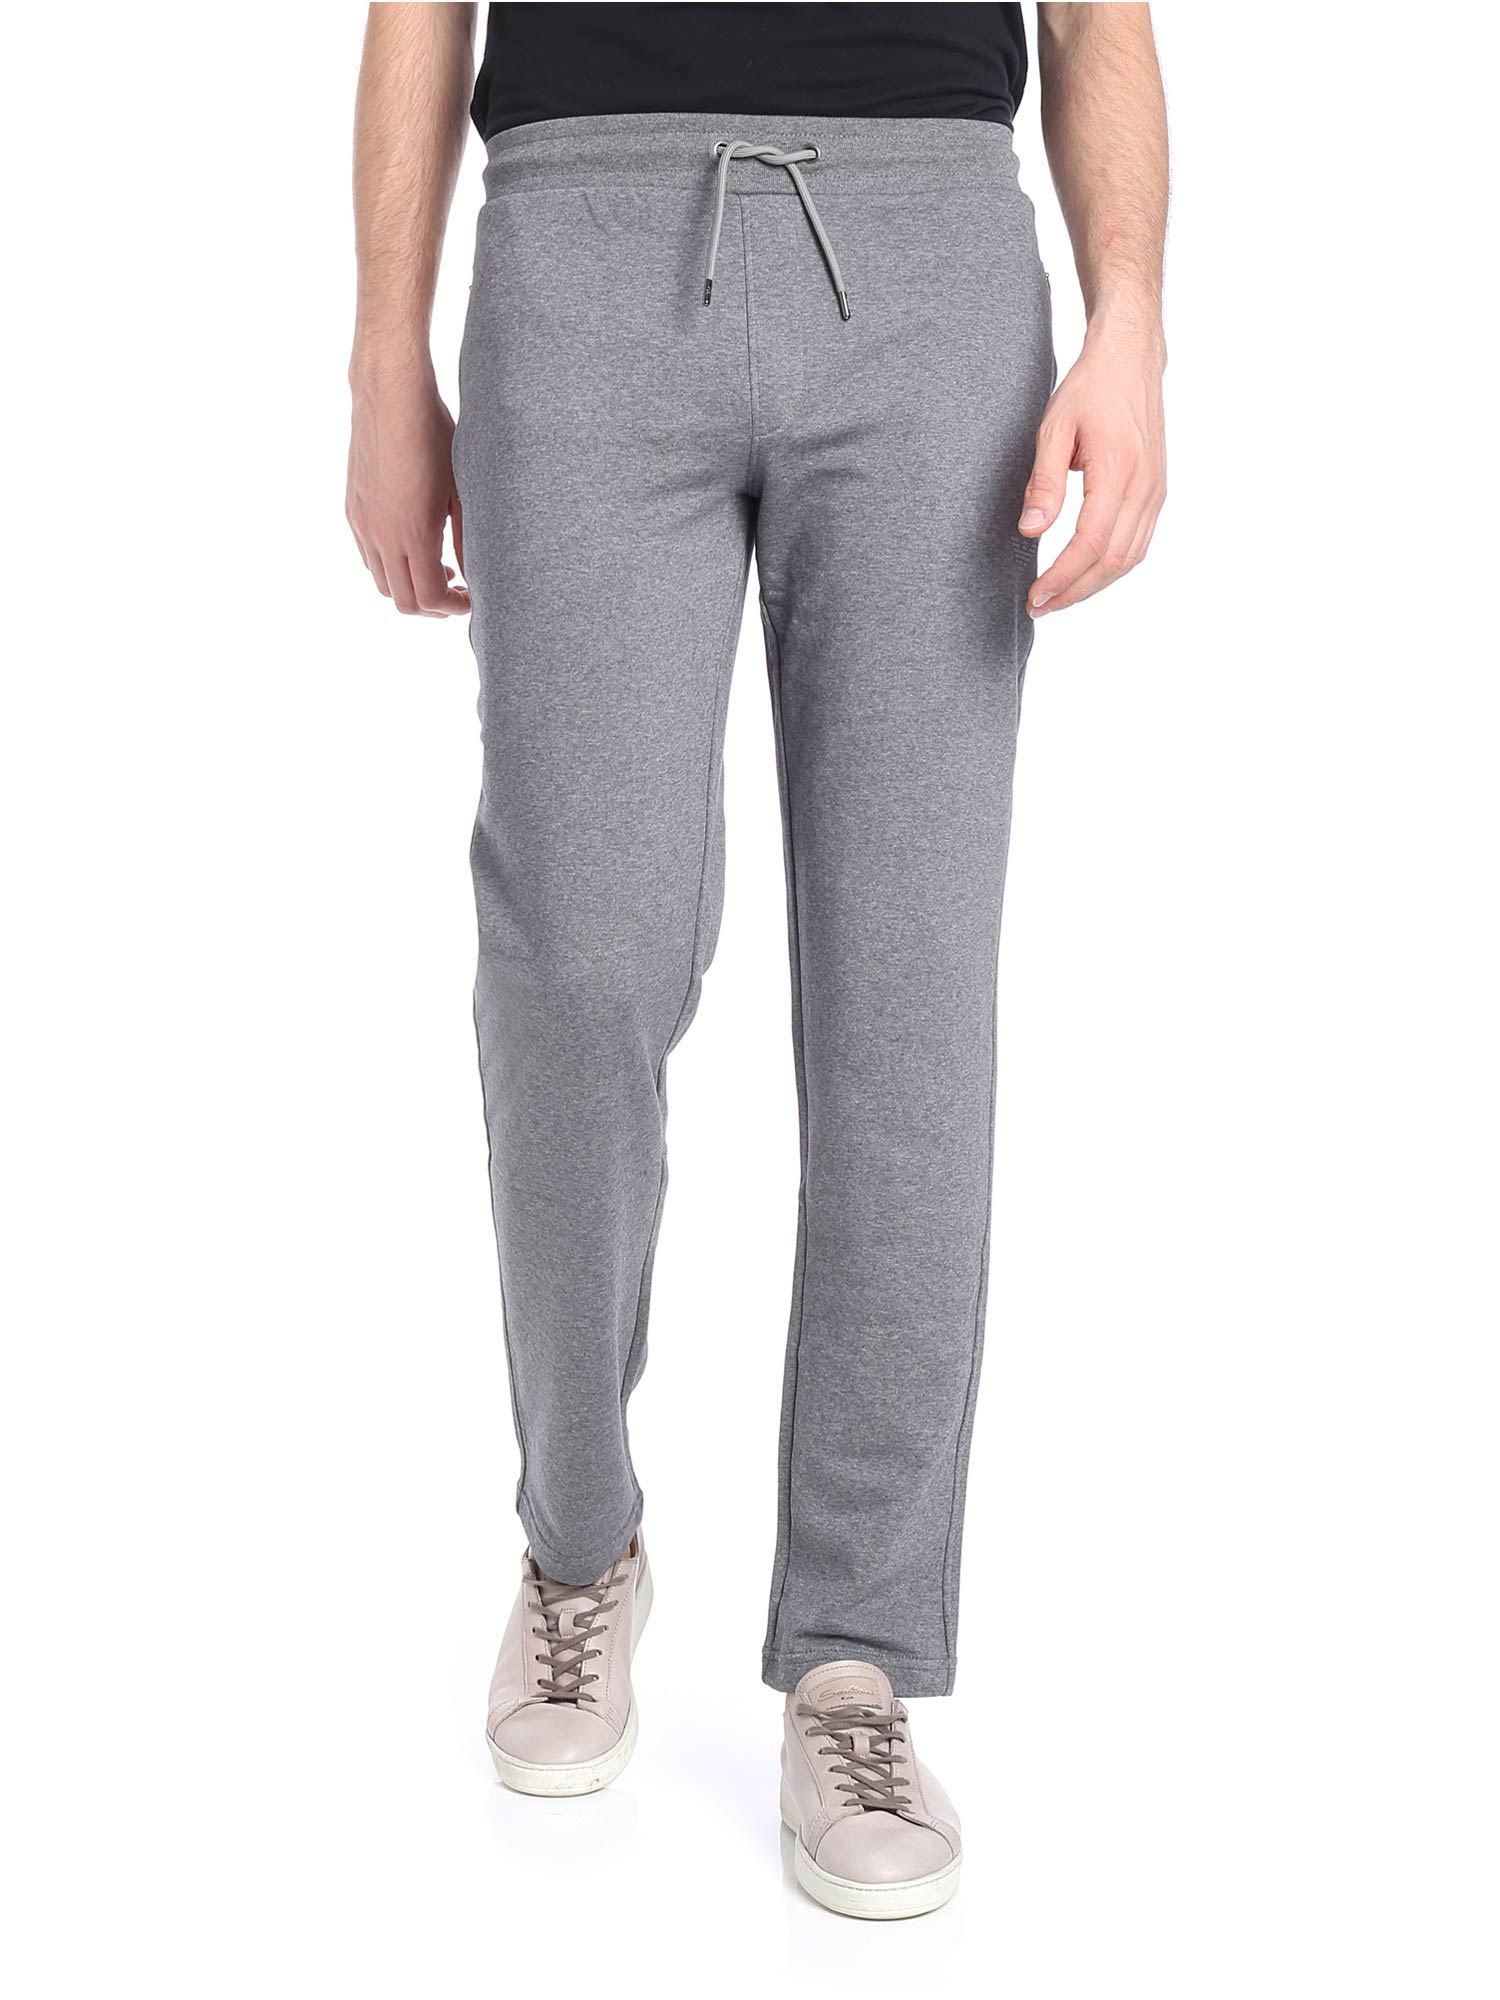 Emporio Armani Cotton Grey Sweatpants With Logo in Gray for Men - Lyst